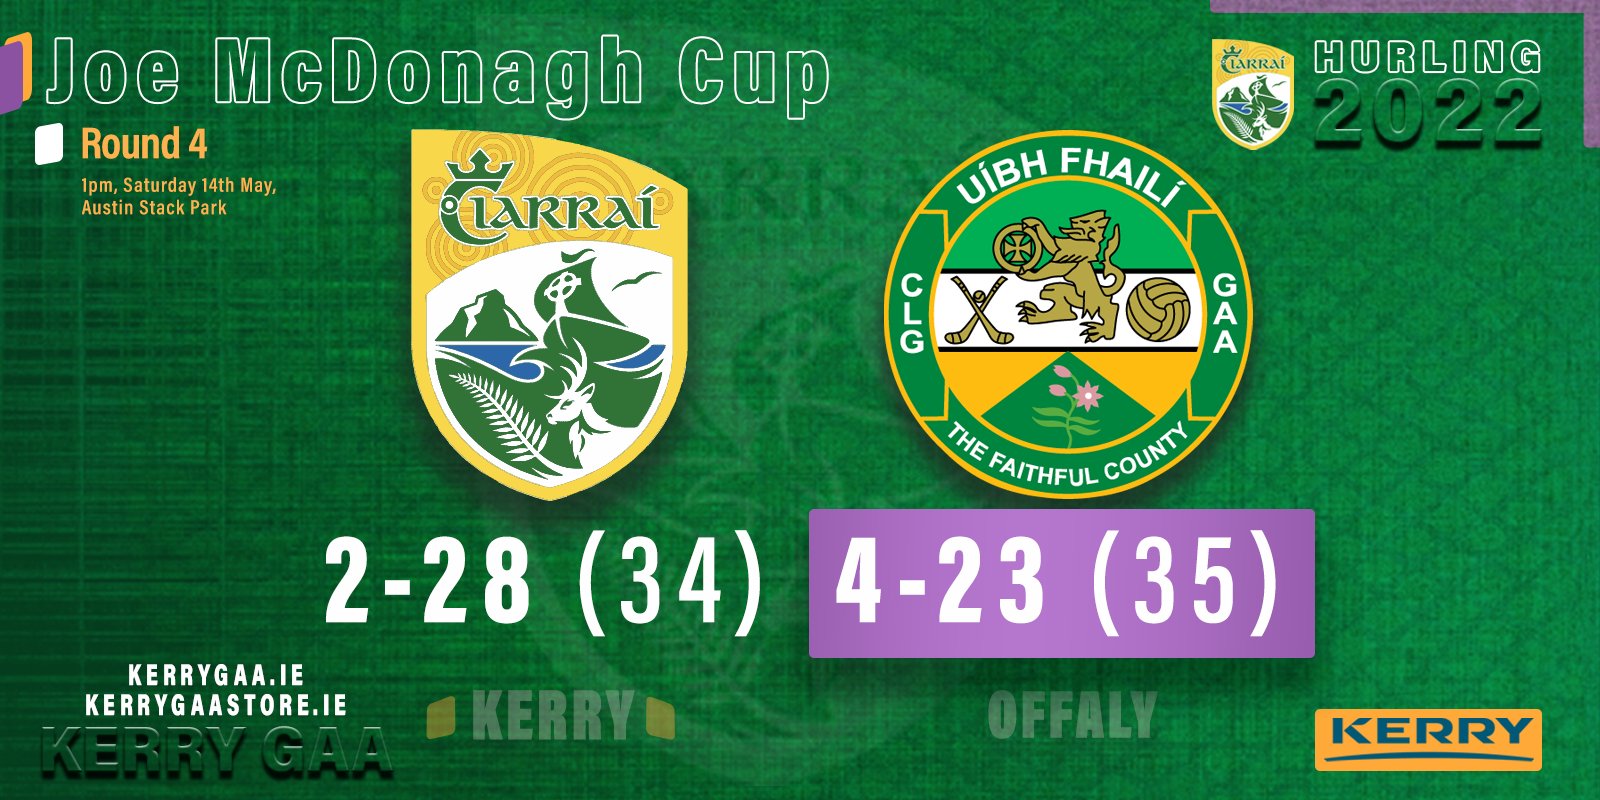 Agonising 1 point defeat for Kerry in Joe McDonagh Cup